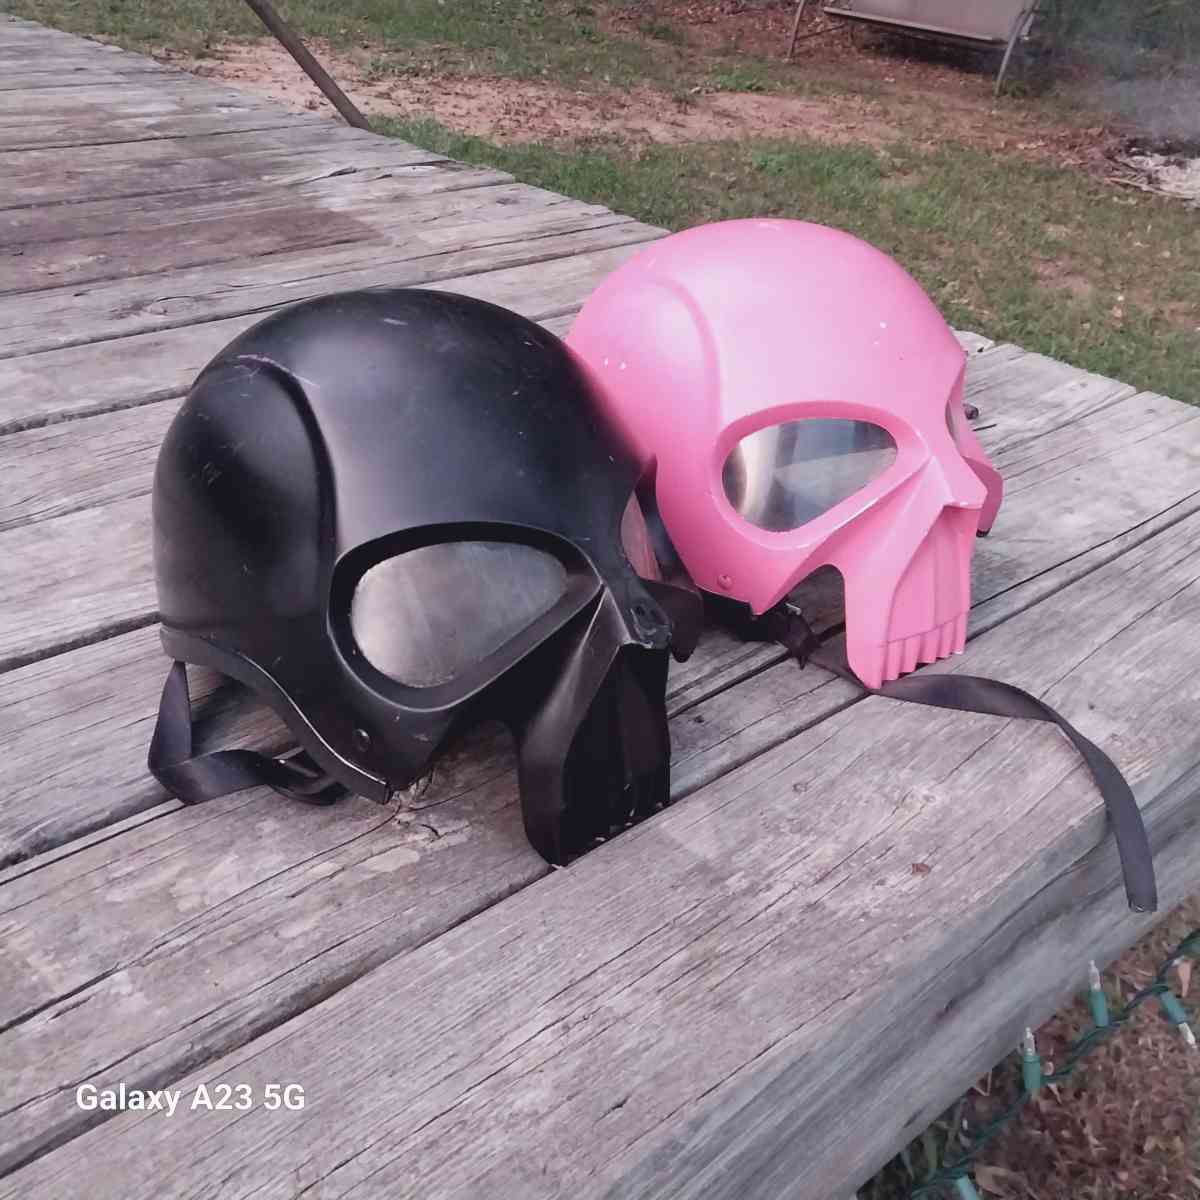 His and her Punisher helmets